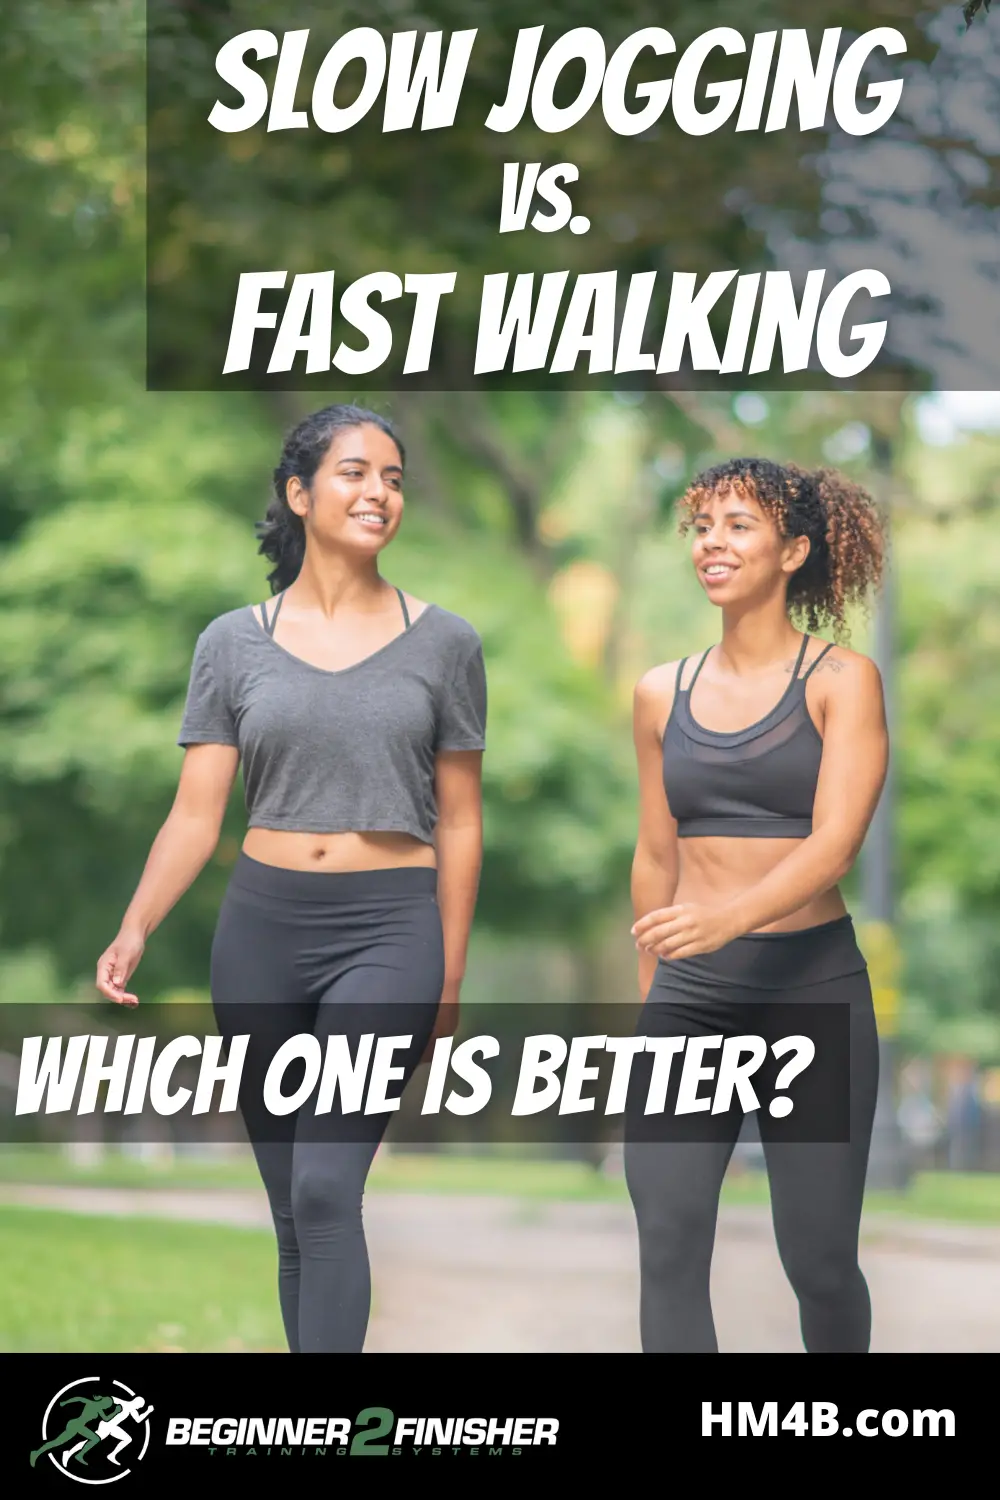 Slow Jogging Vs. Fast Walking - What Are The Key Differences?